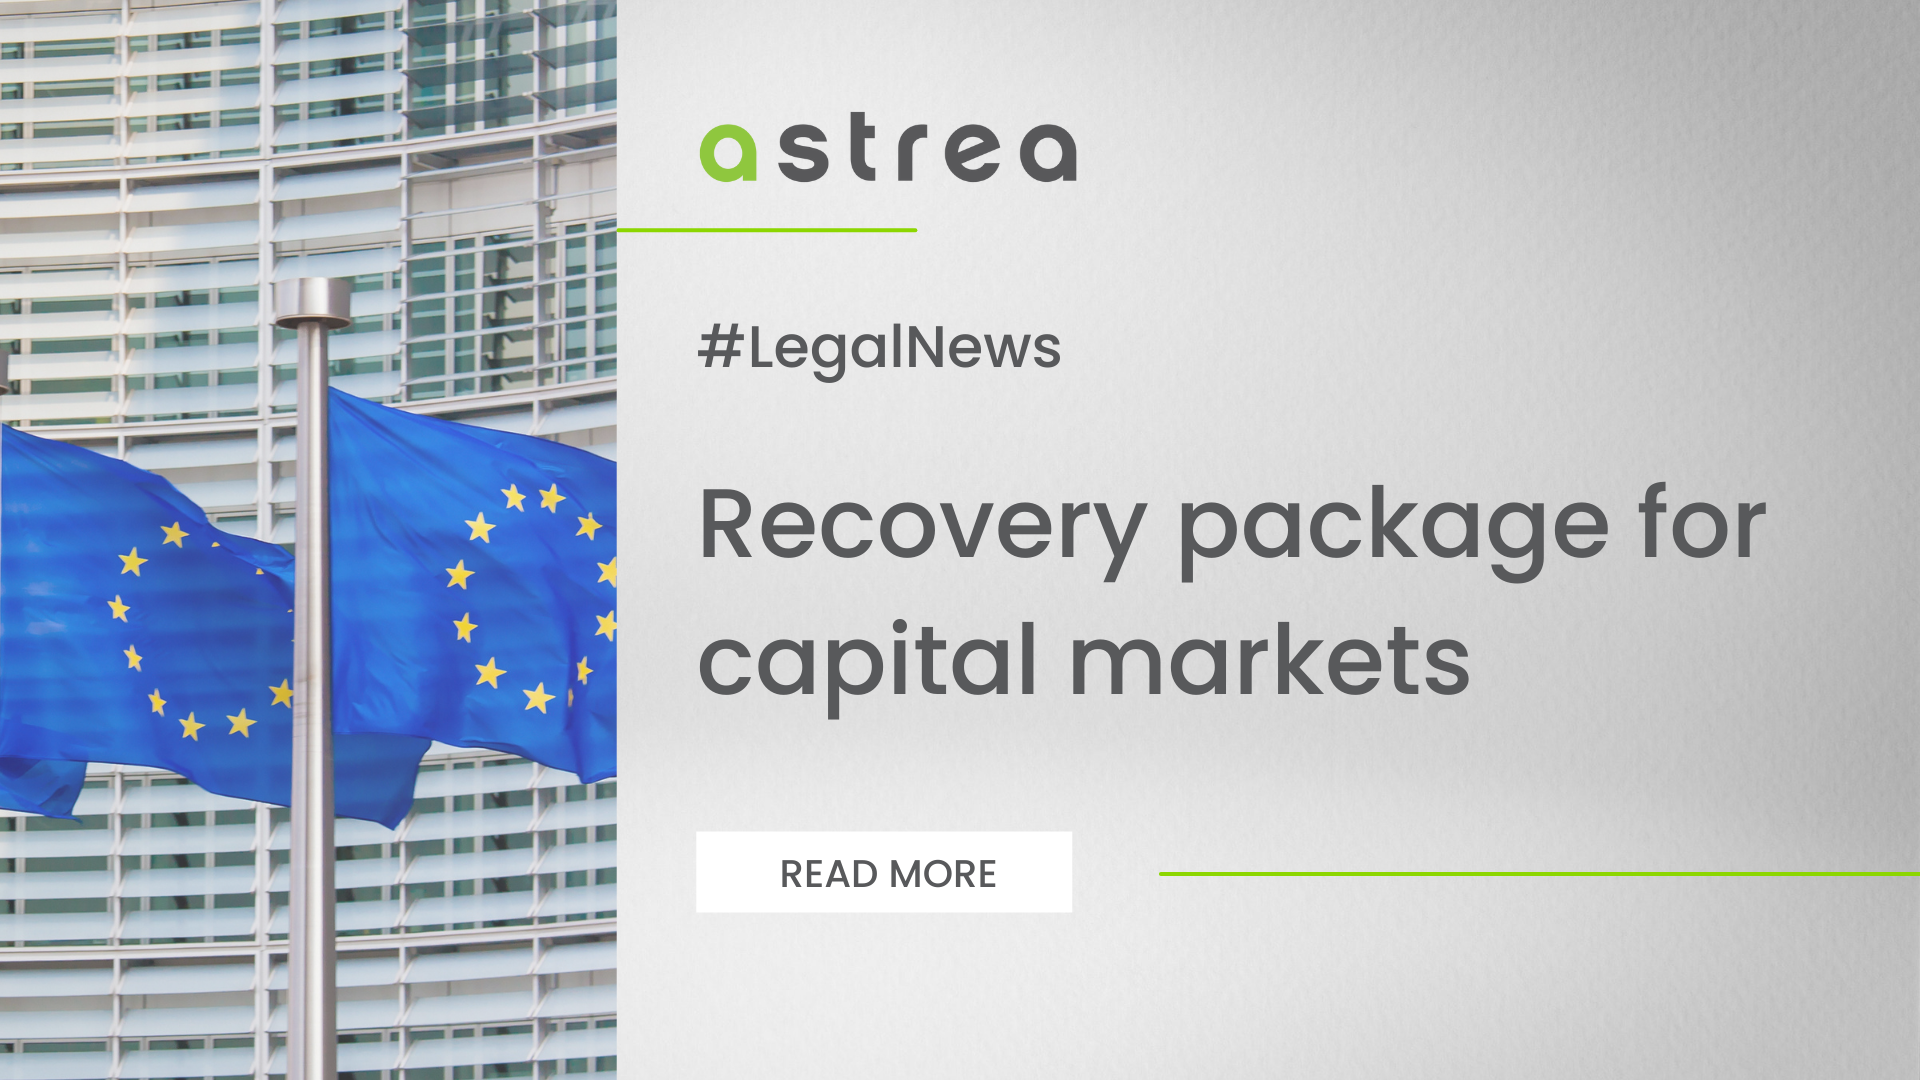 Recovery package for capital markets